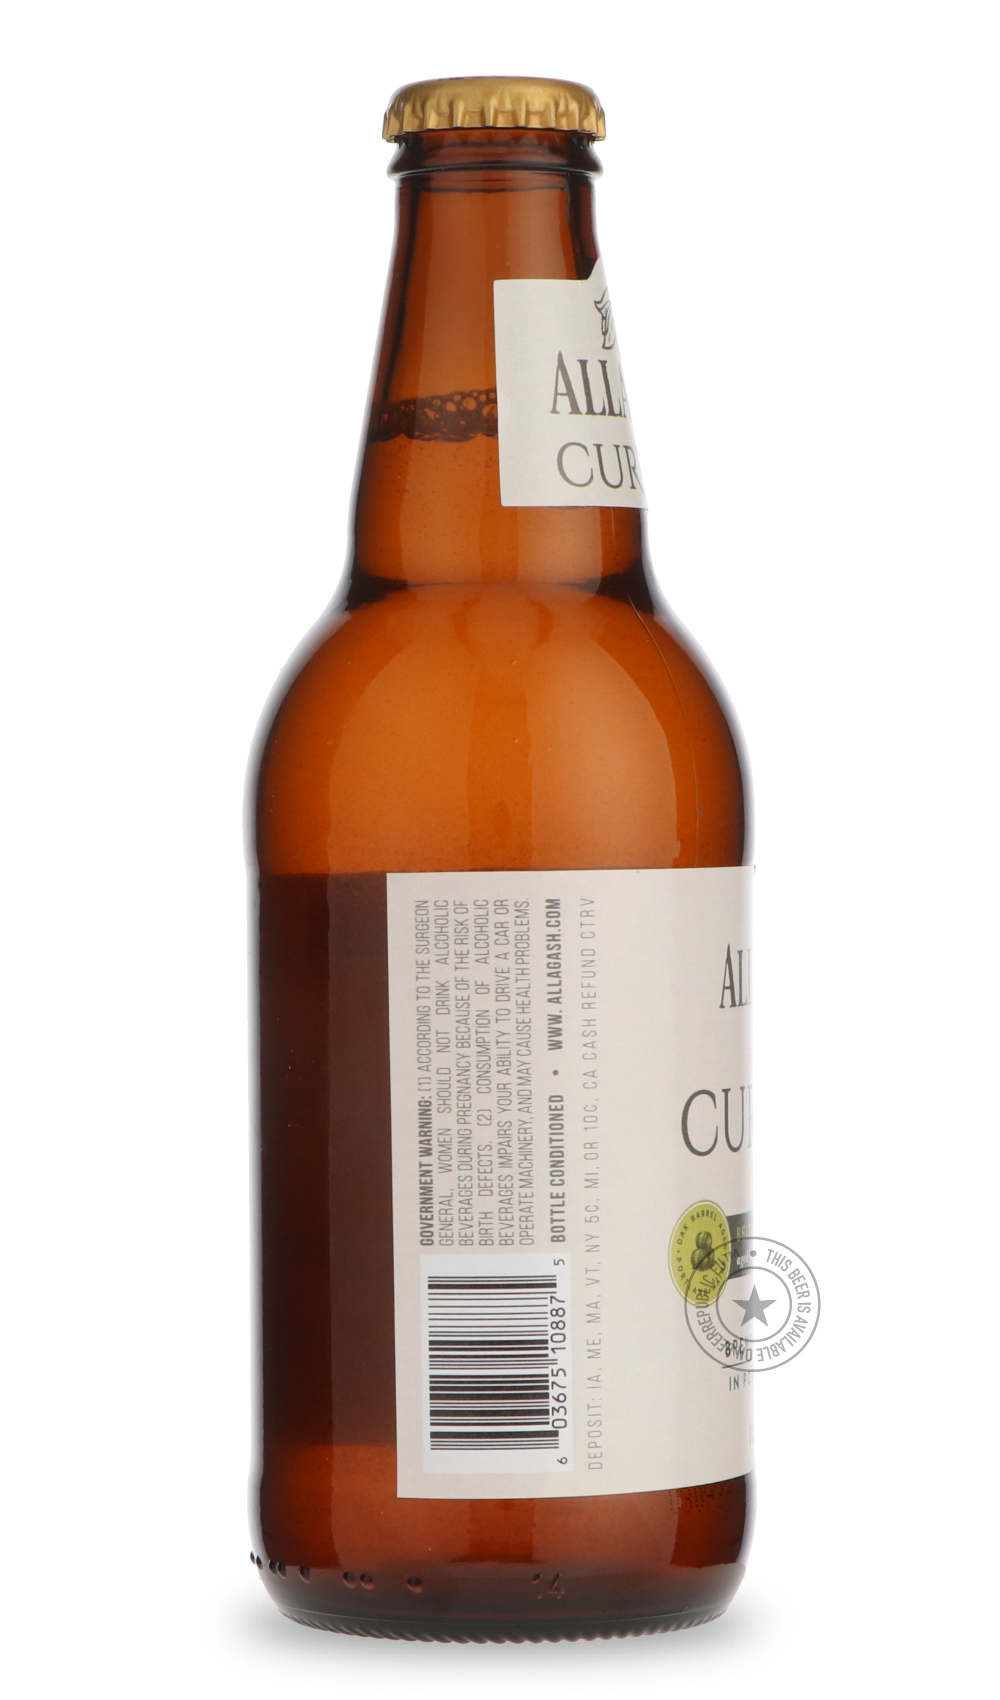 -Allagash- Curieux [355ml bottle]-Pale- Only @ Beer Republic - The best online beer store for American & Canadian craft beer - Buy beer online from the USA and Canada - Bier online kopen - Amerikaans bier kopen - Craft beer store - Craft beer kopen - Amerikanisch bier kaufen - Bier online kaufen - Acheter biere online - IPA - Stout - Porter - New England IPA - Hazy IPA - Imperial Stout - Barrel Aged - Barrel Aged Imperial Stout - Brown - Dark beer - Blond - Blonde - Pilsner - Lager - Wheat - Weizen - Amber 